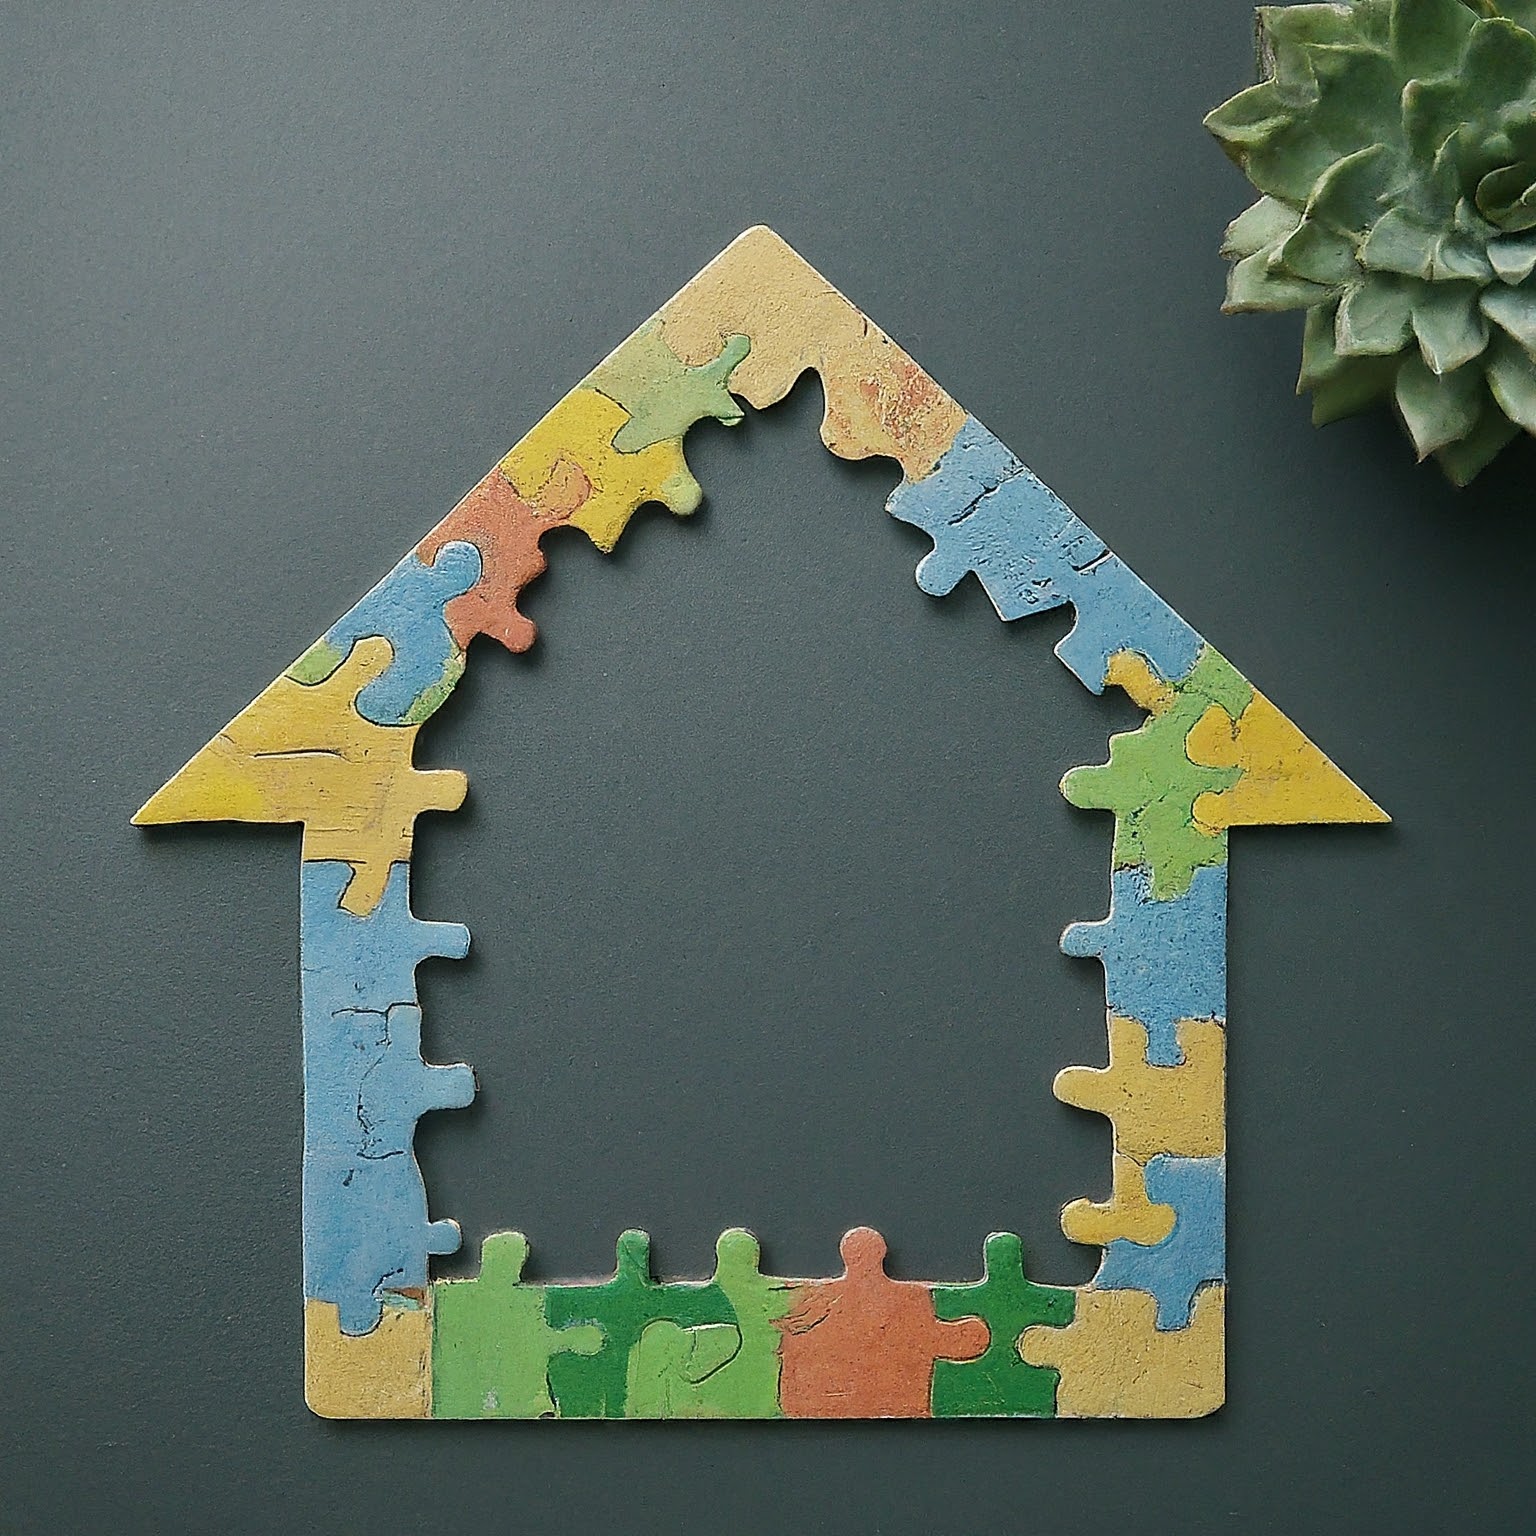 A colorful jigsaw puzzle depicting a house, on a black background.